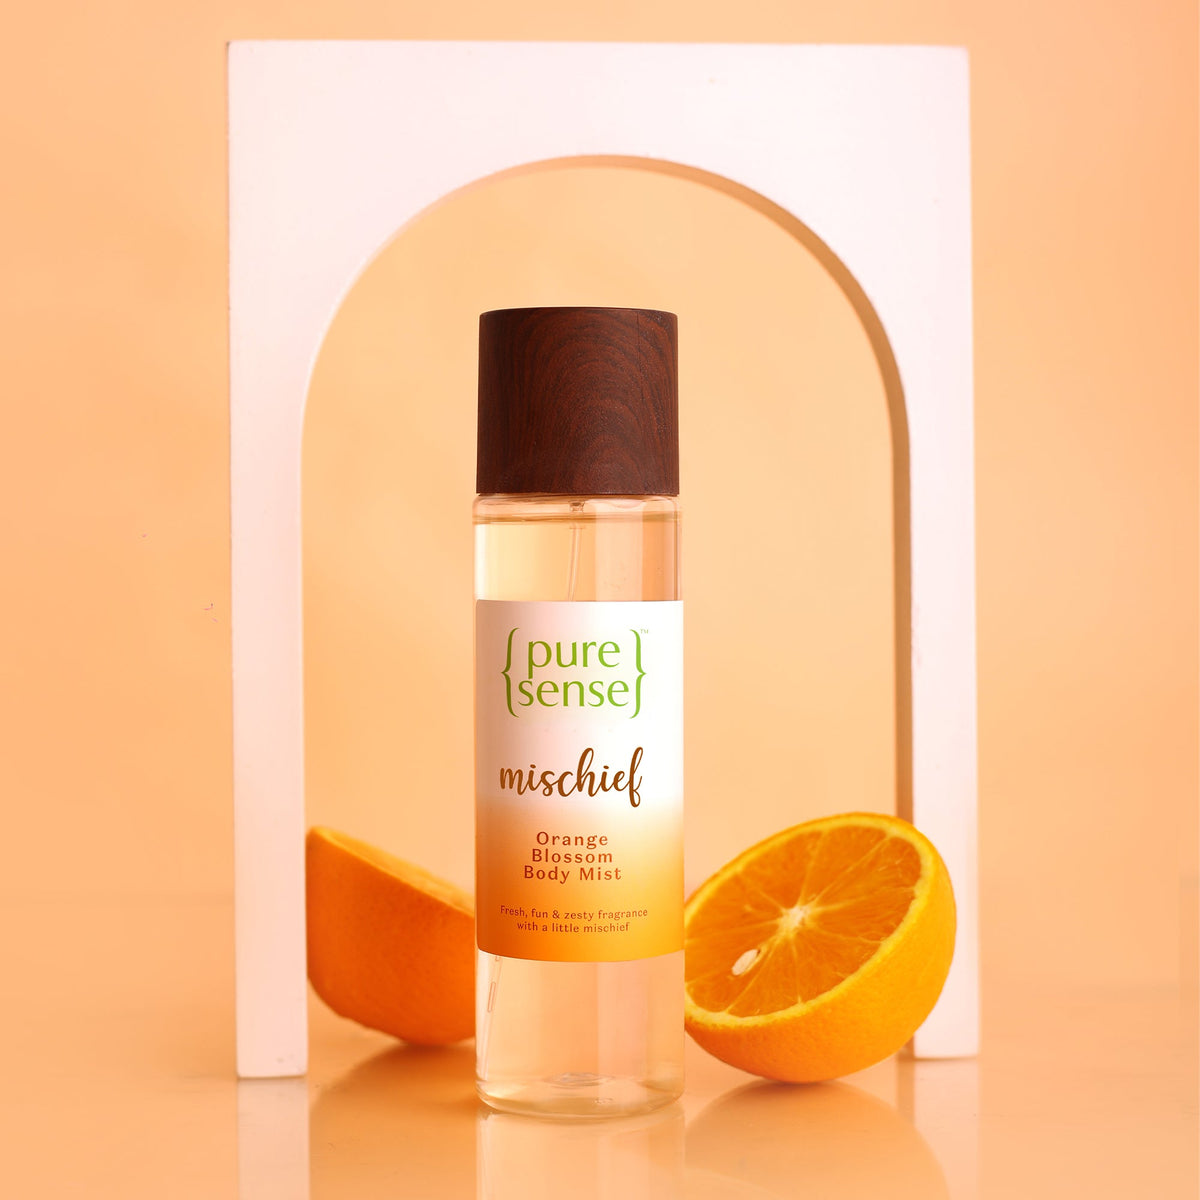 [CRED] Mischief Orange Blossom Body Mist | From the makers of Parachute Advansed | 150ml